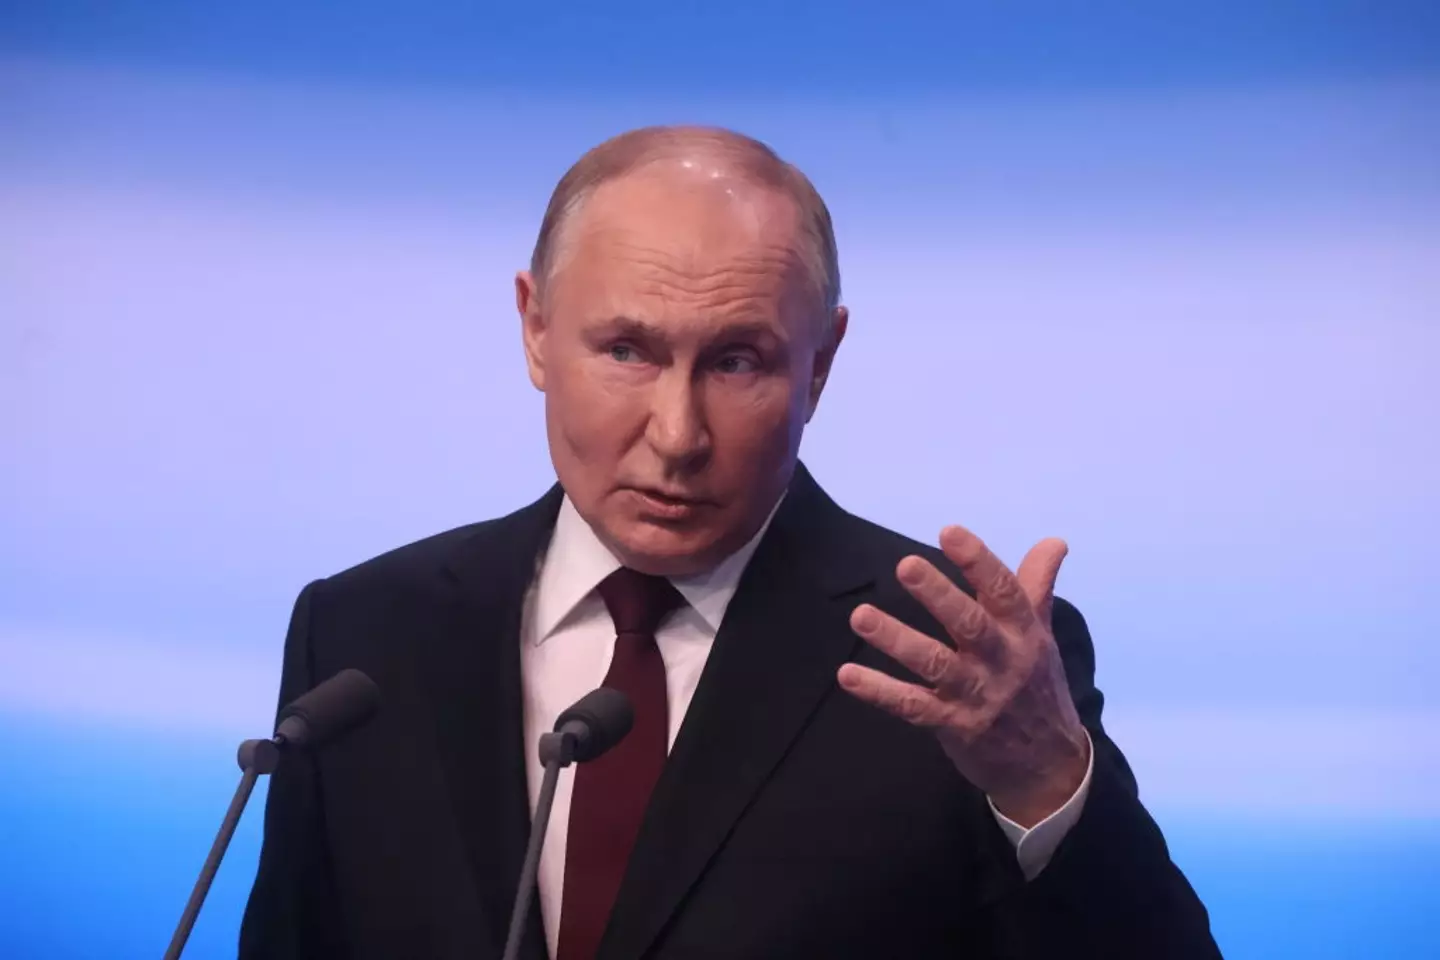 Vladimir Putin has just been re-elected as the President of Russia.